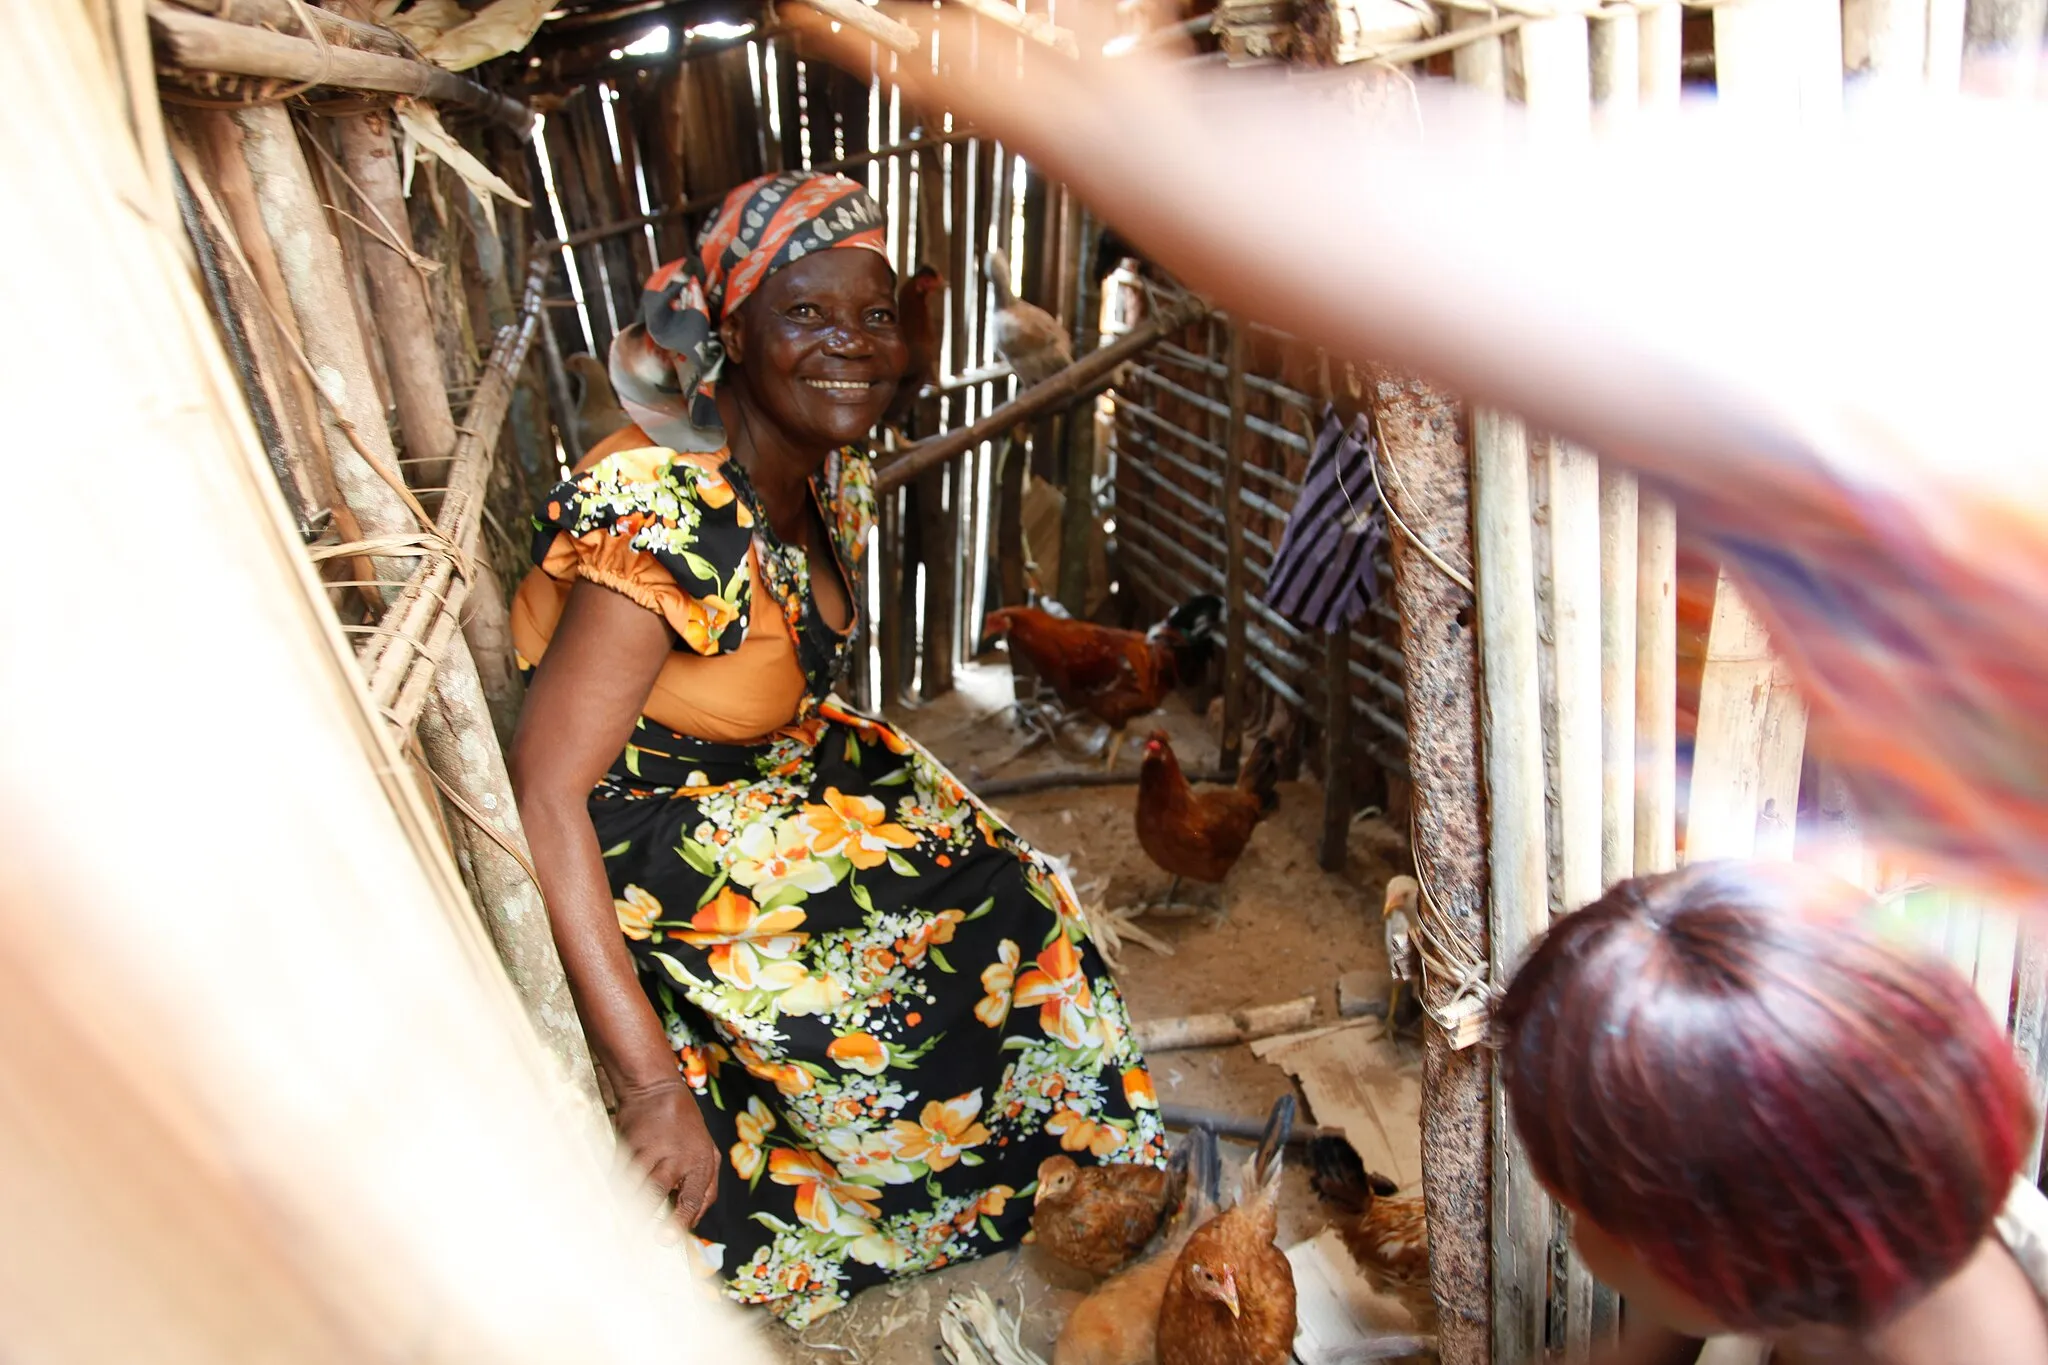 Photo showing: Pauline Velo, president of one of the community nutrition 'cells' in Masi Manimba, shows off the community's new chicken coup. Keeping a flock of chickens to lay eggs for the community to eat and sell - rather than just cooking and eating the chickens - is one of the simple ideas that the community has adopted with the help of Action Against Hunger and UK aid.
Pauline Velo is a community volunteer who, with the help of UK aid, was trained in healthy nutrition techniques by Action Against Hunger. She now passes on her training to families in the town of Masi Manimba, in western DR Congo's Bandundu Province.
Background
Acute malnutrition is a major public health problem across the Democratic Republic of Congo. UK aid has supported the government of DRC and aid agencies including Action Against Hunger to provide emergency nutrition response programmes across DRC in 2010 and 2011.

In some areas, the communities have taken the ideas that Action Against Hunger brought to them, and organised themselves to tackle malnutrition from the ground up - by forming their own co-operative farms and self-support groups.